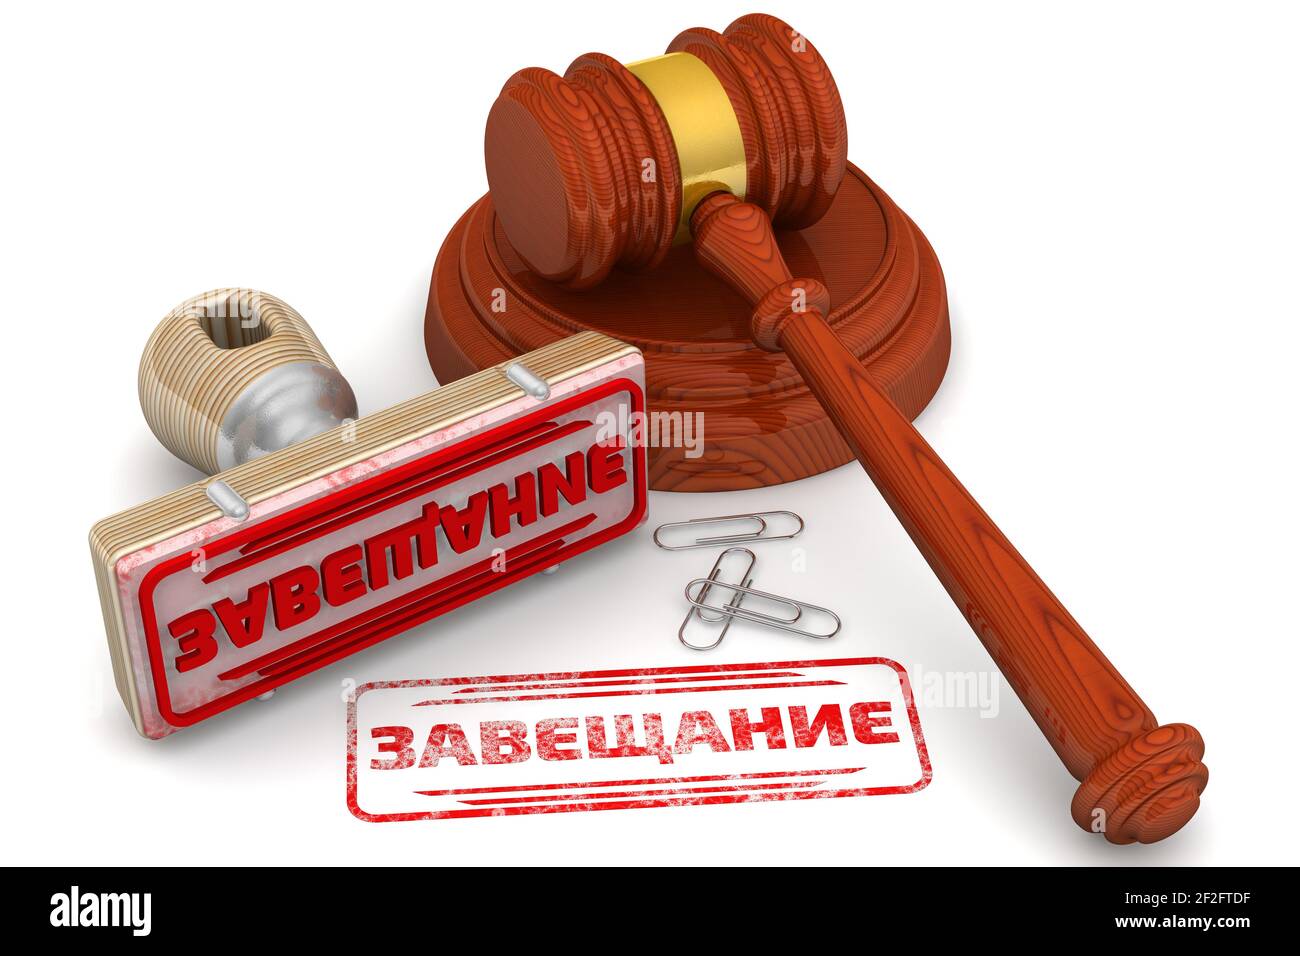 Testament. Wooden stamp and red imprint TESTAMENT in Russian language with judge's hammer on white surface. 3D illustration Stock Photo